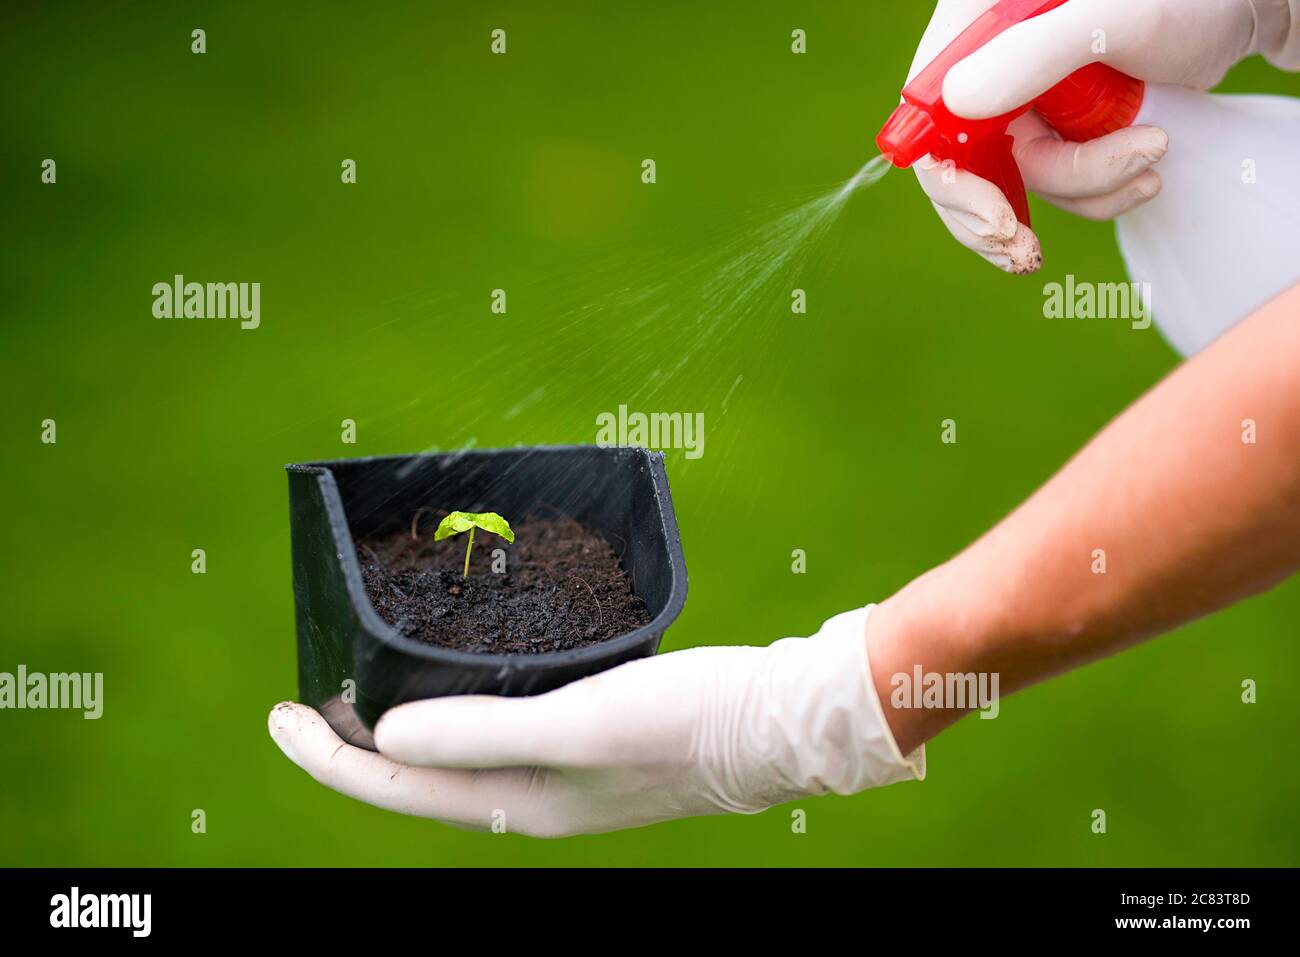 Basil sprout in a flower pot sprayed with water. Stock Photo